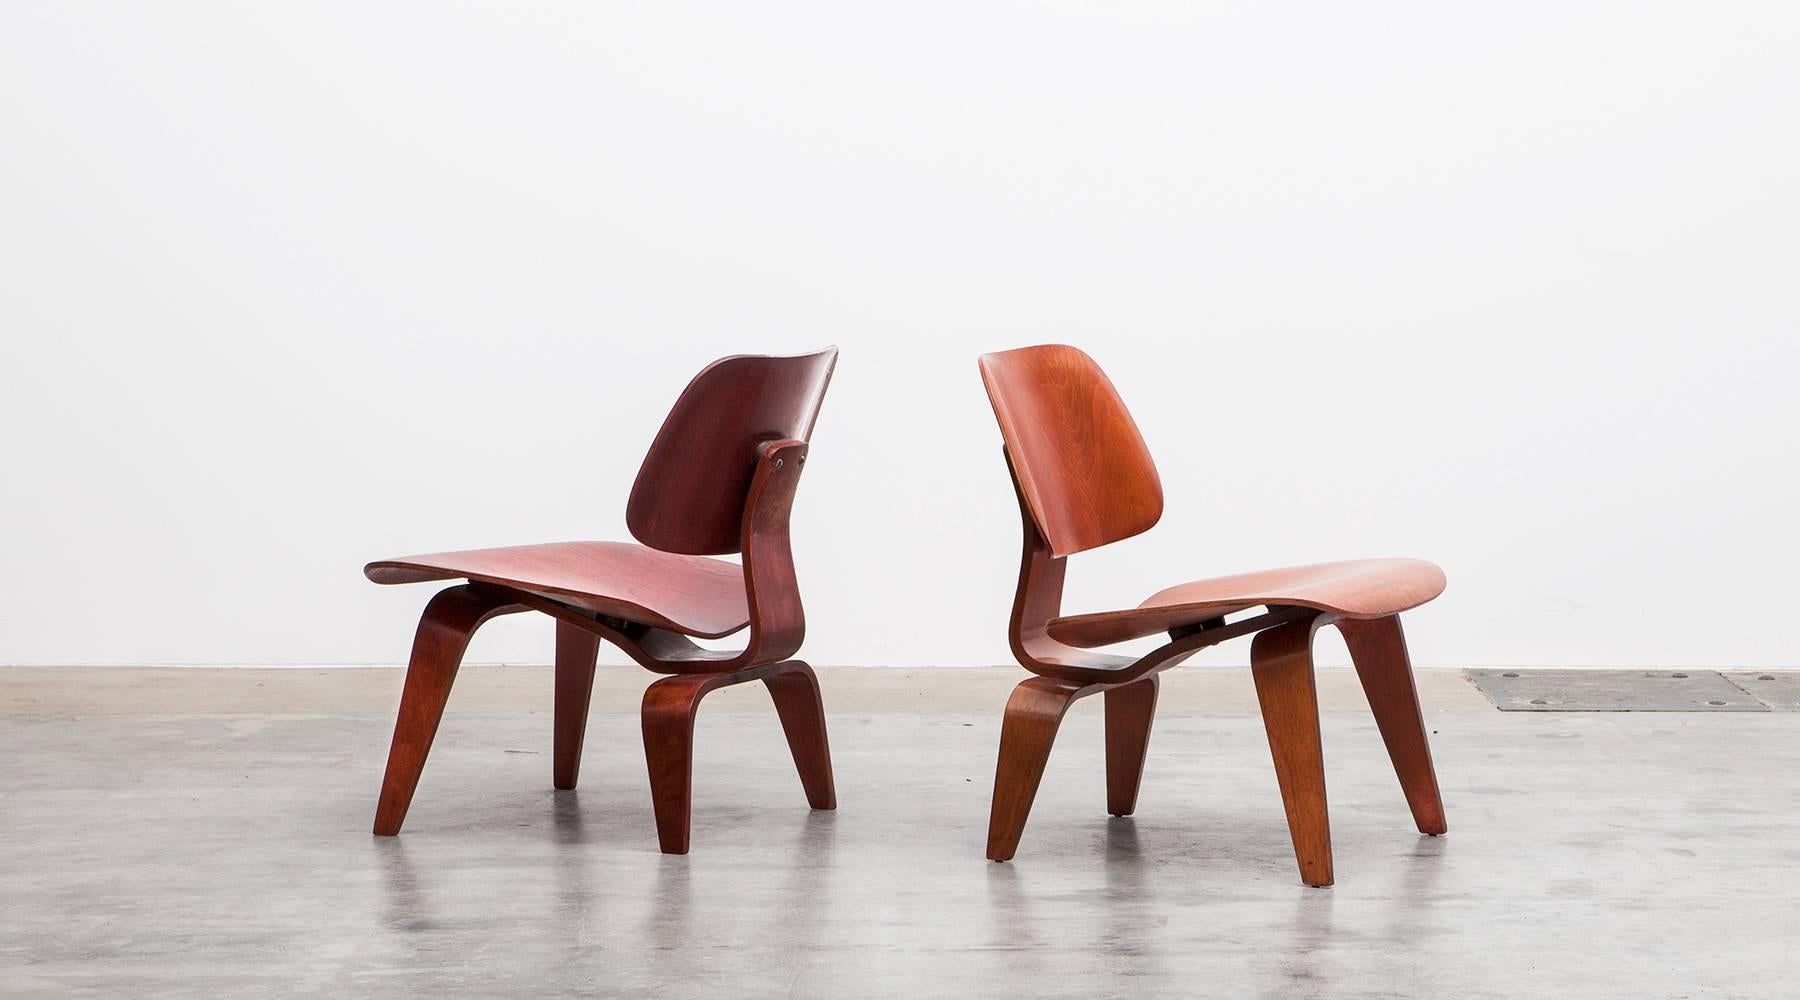 Molded plywood in red, brown LCW Chairs by Charles and Ray Eames, USA, 1948.

A set of Charles and Ray Eames 